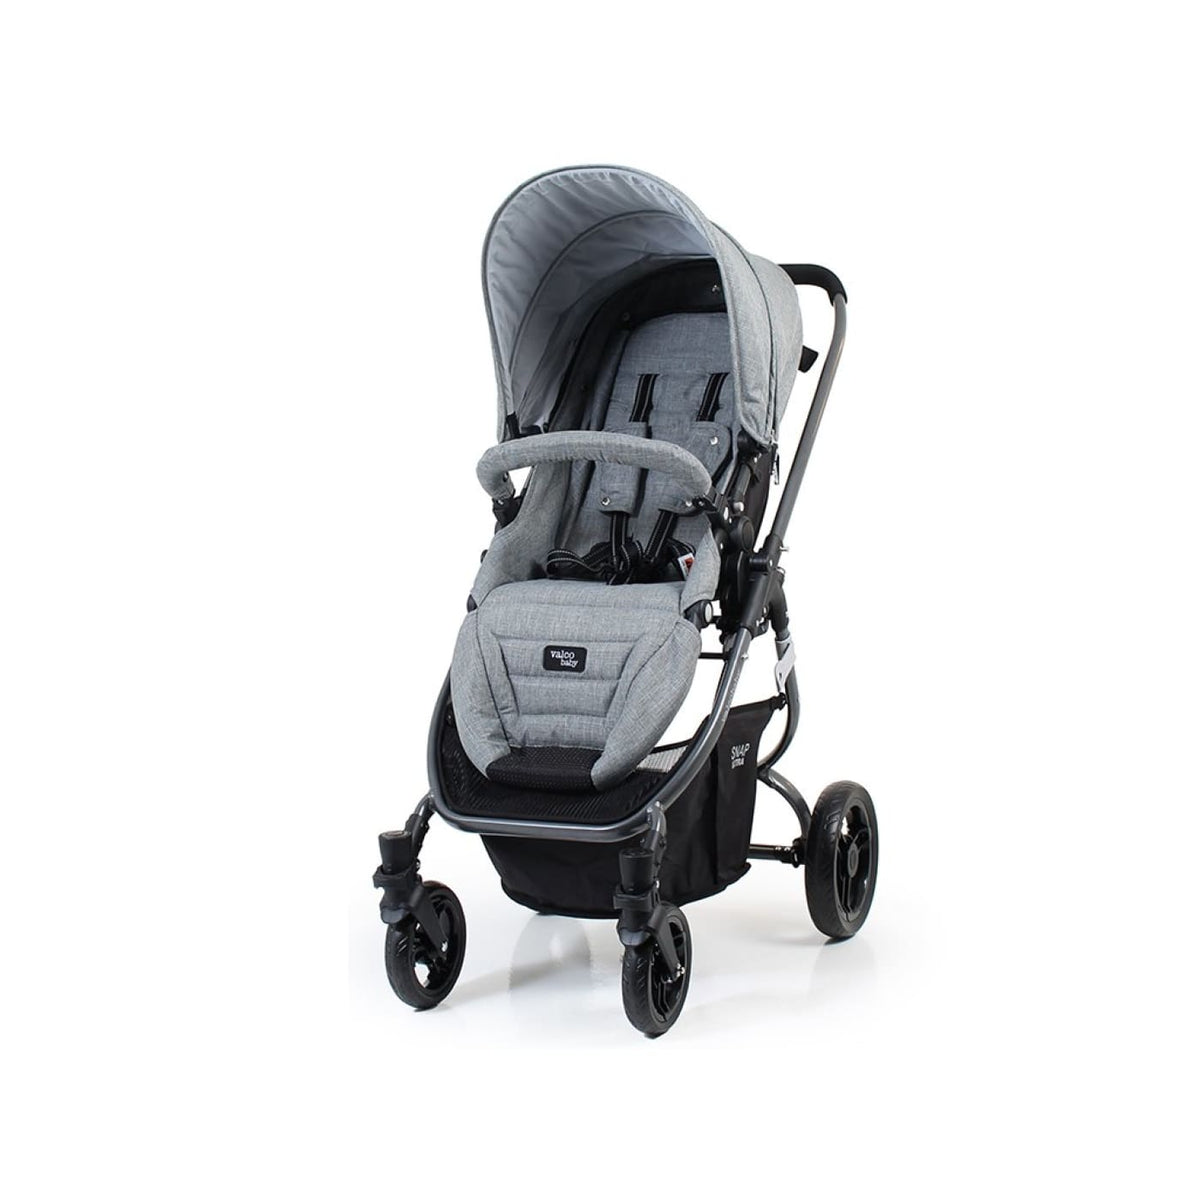 Valco Baby Snap Ultra Tailormade - Grey Marle - PRAMS &amp; STROLLERS - 4 WHEEL TSC